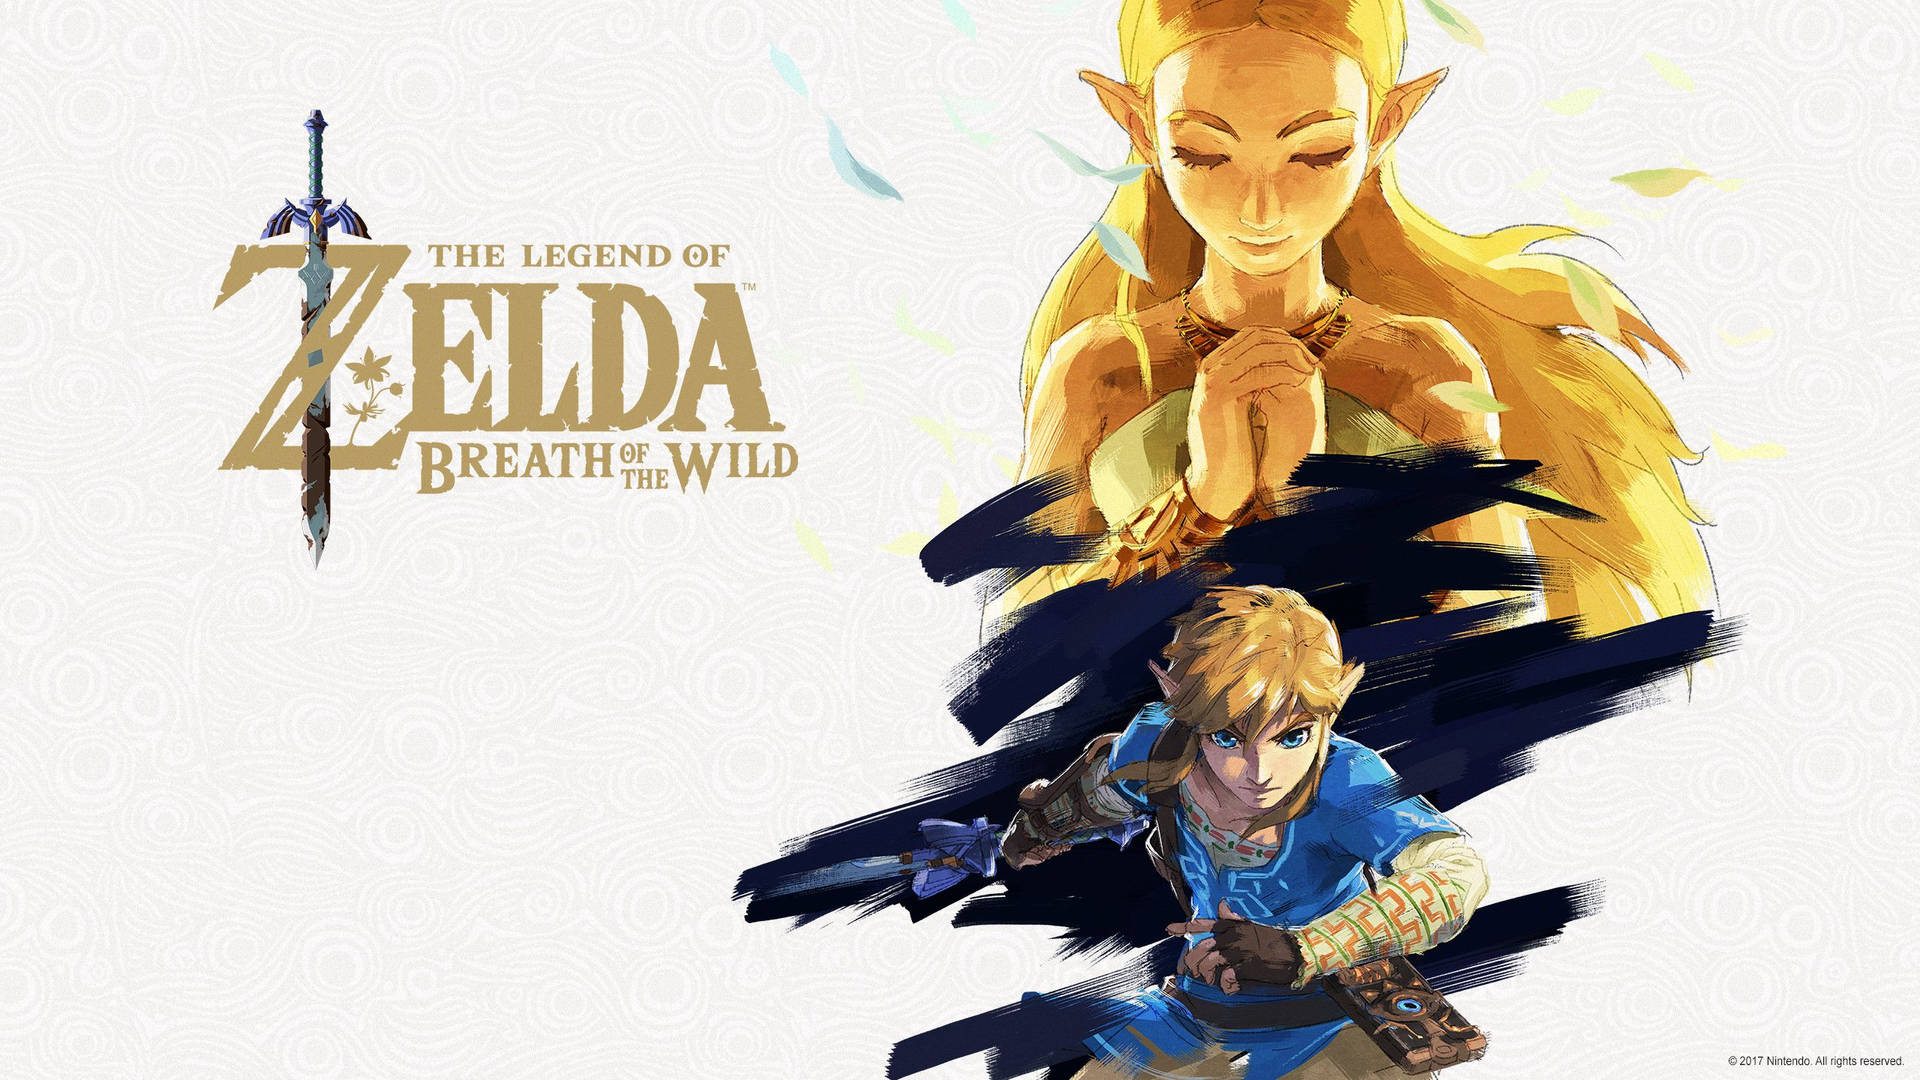 The beauty of Princess Zelda shines through like a radiant painting. Wallpaper